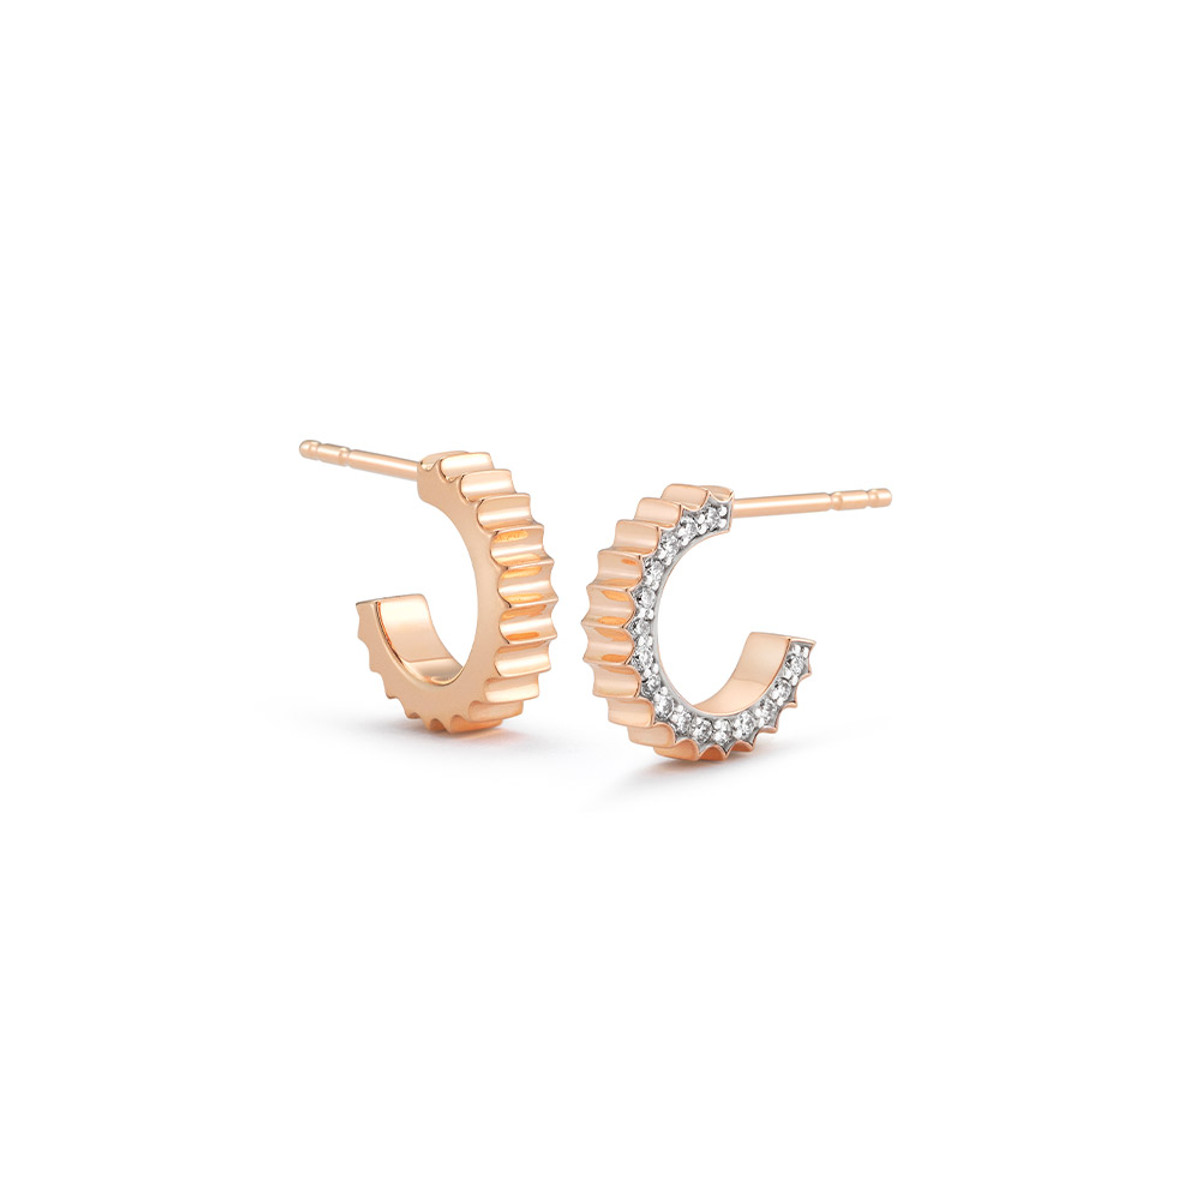 Walters Faith Clive 18K Rose Gold and Diamond Fluted Huggie Earrings-61718